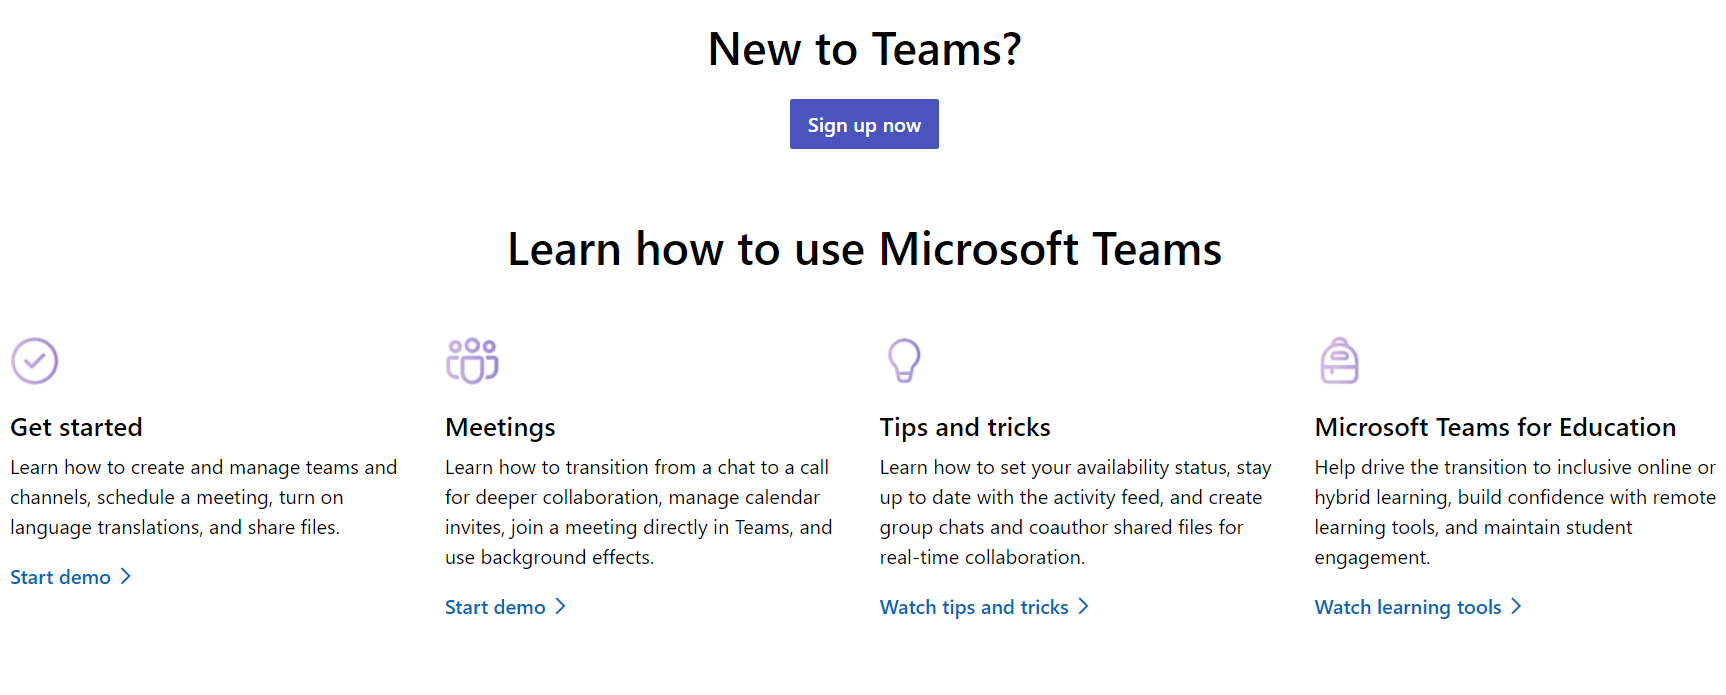 Microsoft Teams with sign up button and 4 sections for learning how to use the team management software